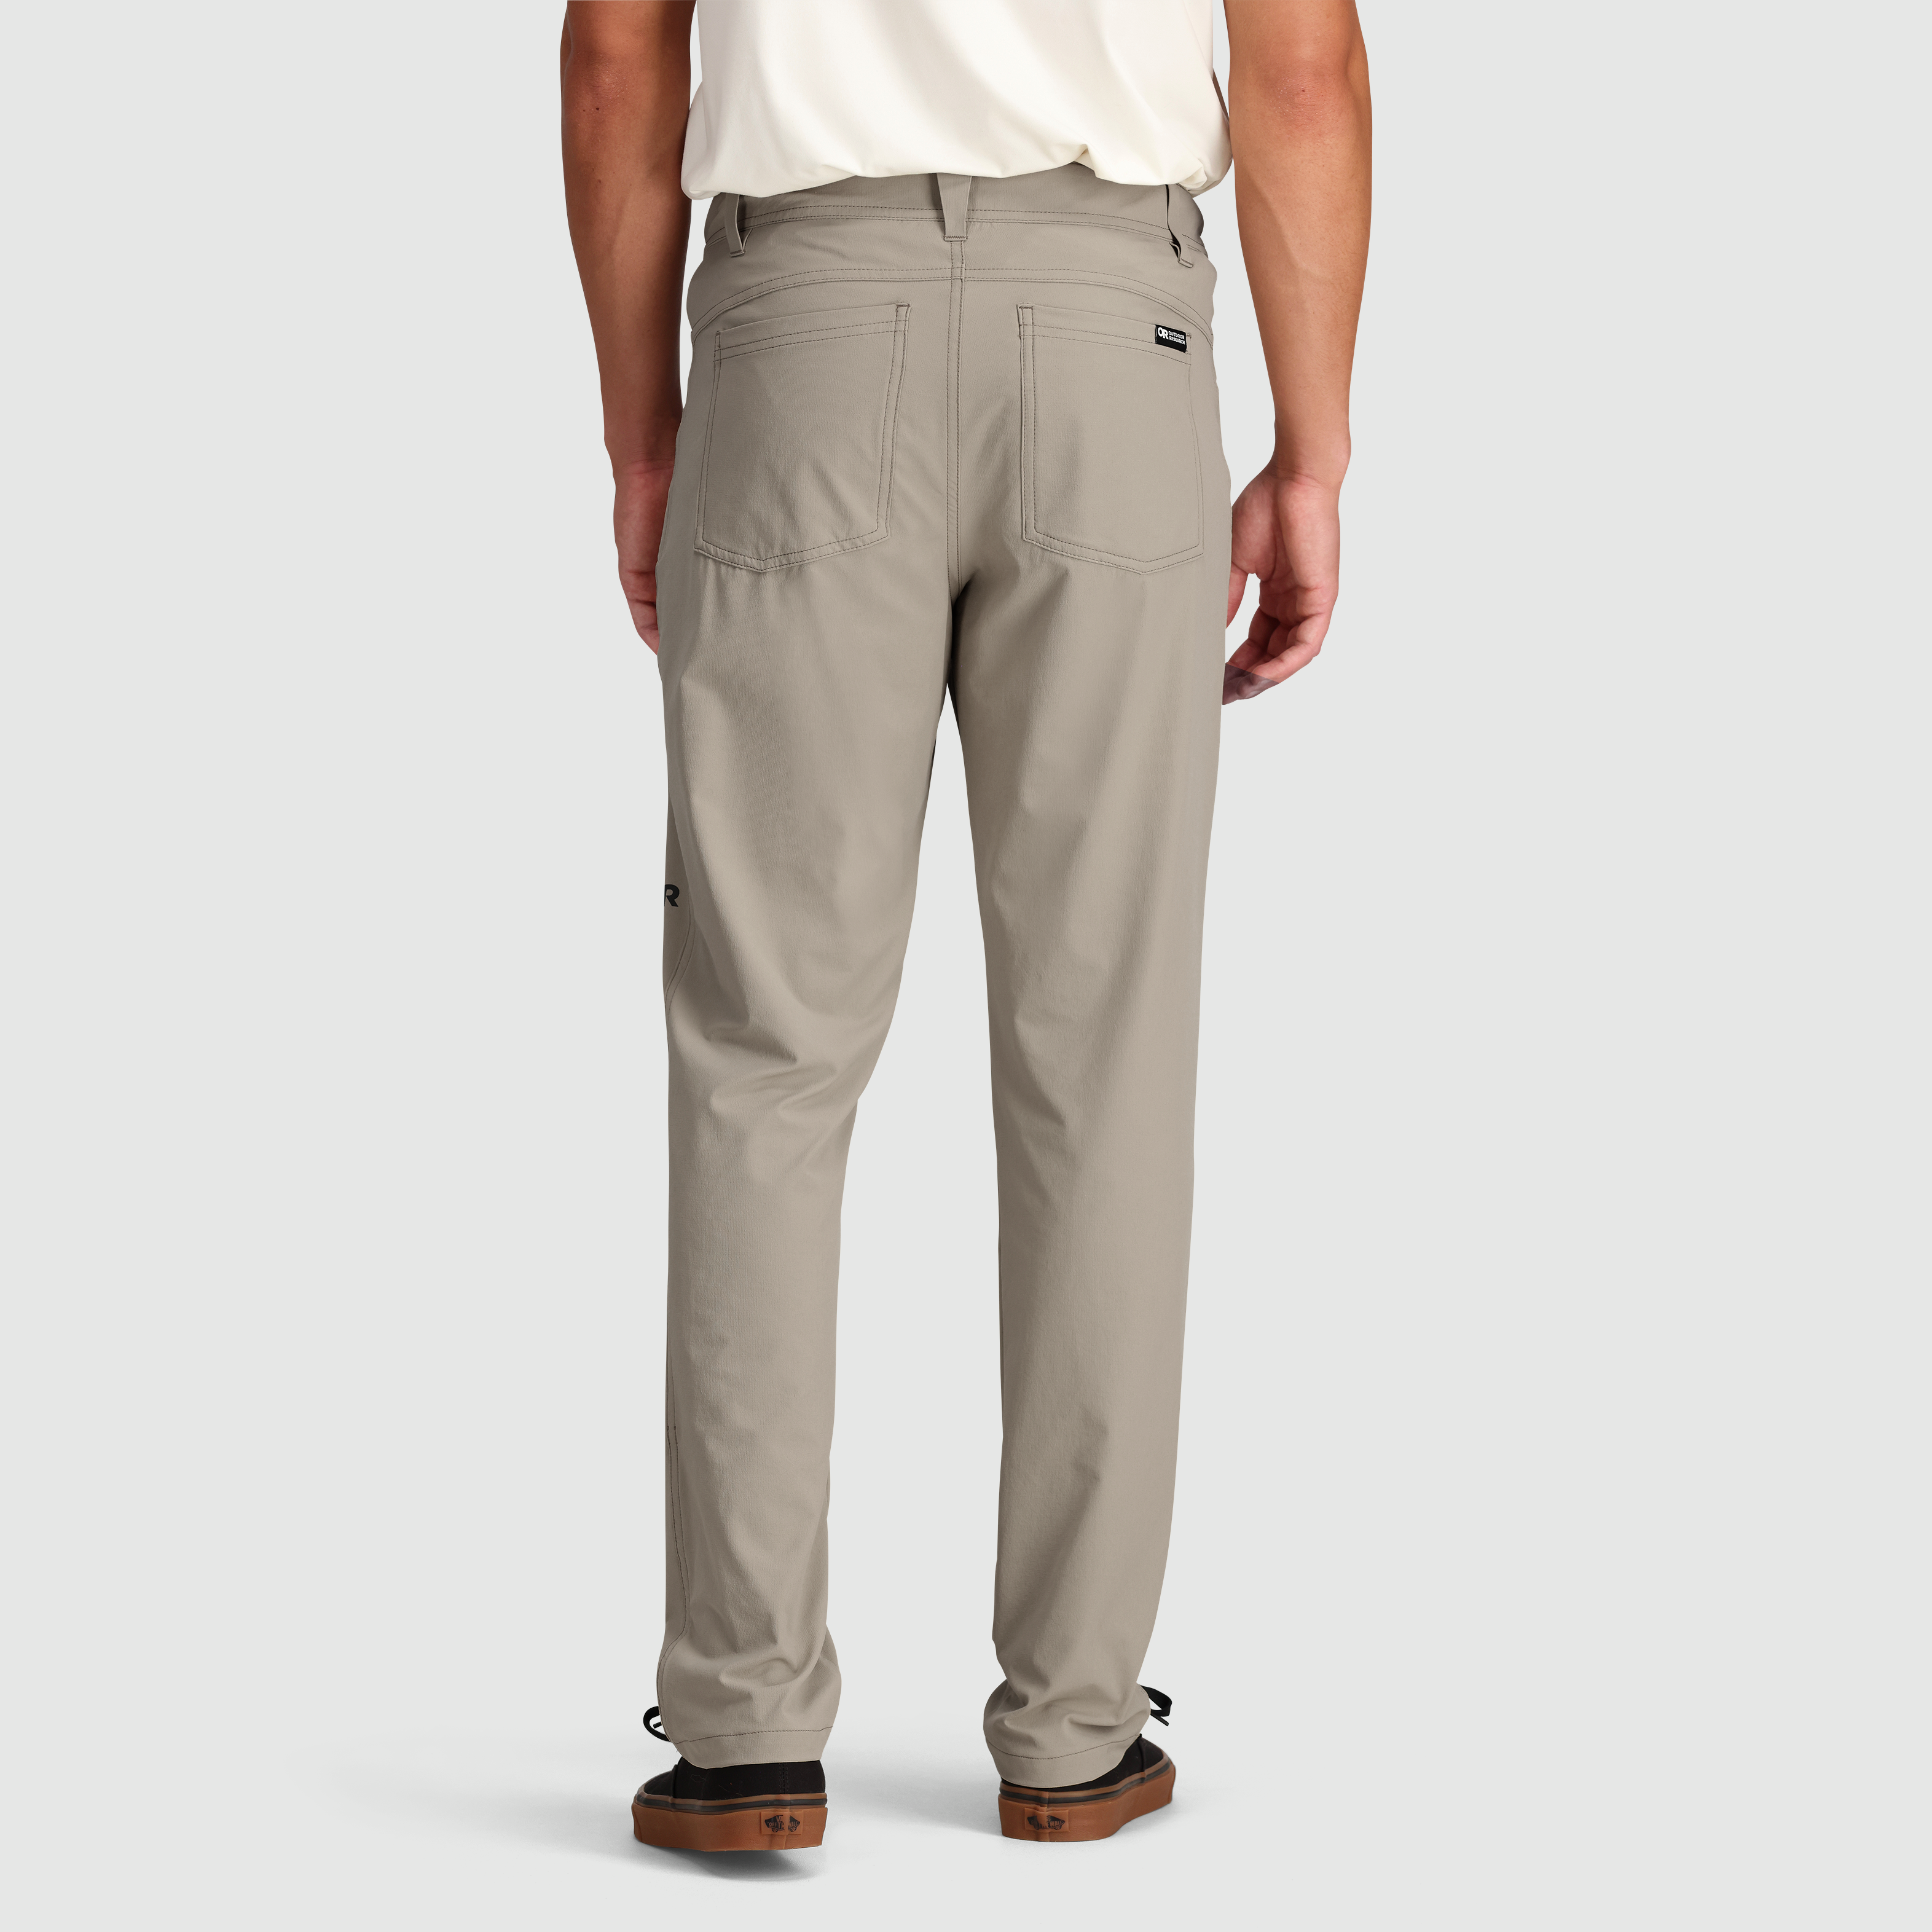 Men Letter Patched Tapered Pants | Pants outfit men, Khaki pants outfit  men, Khaki pants outfit